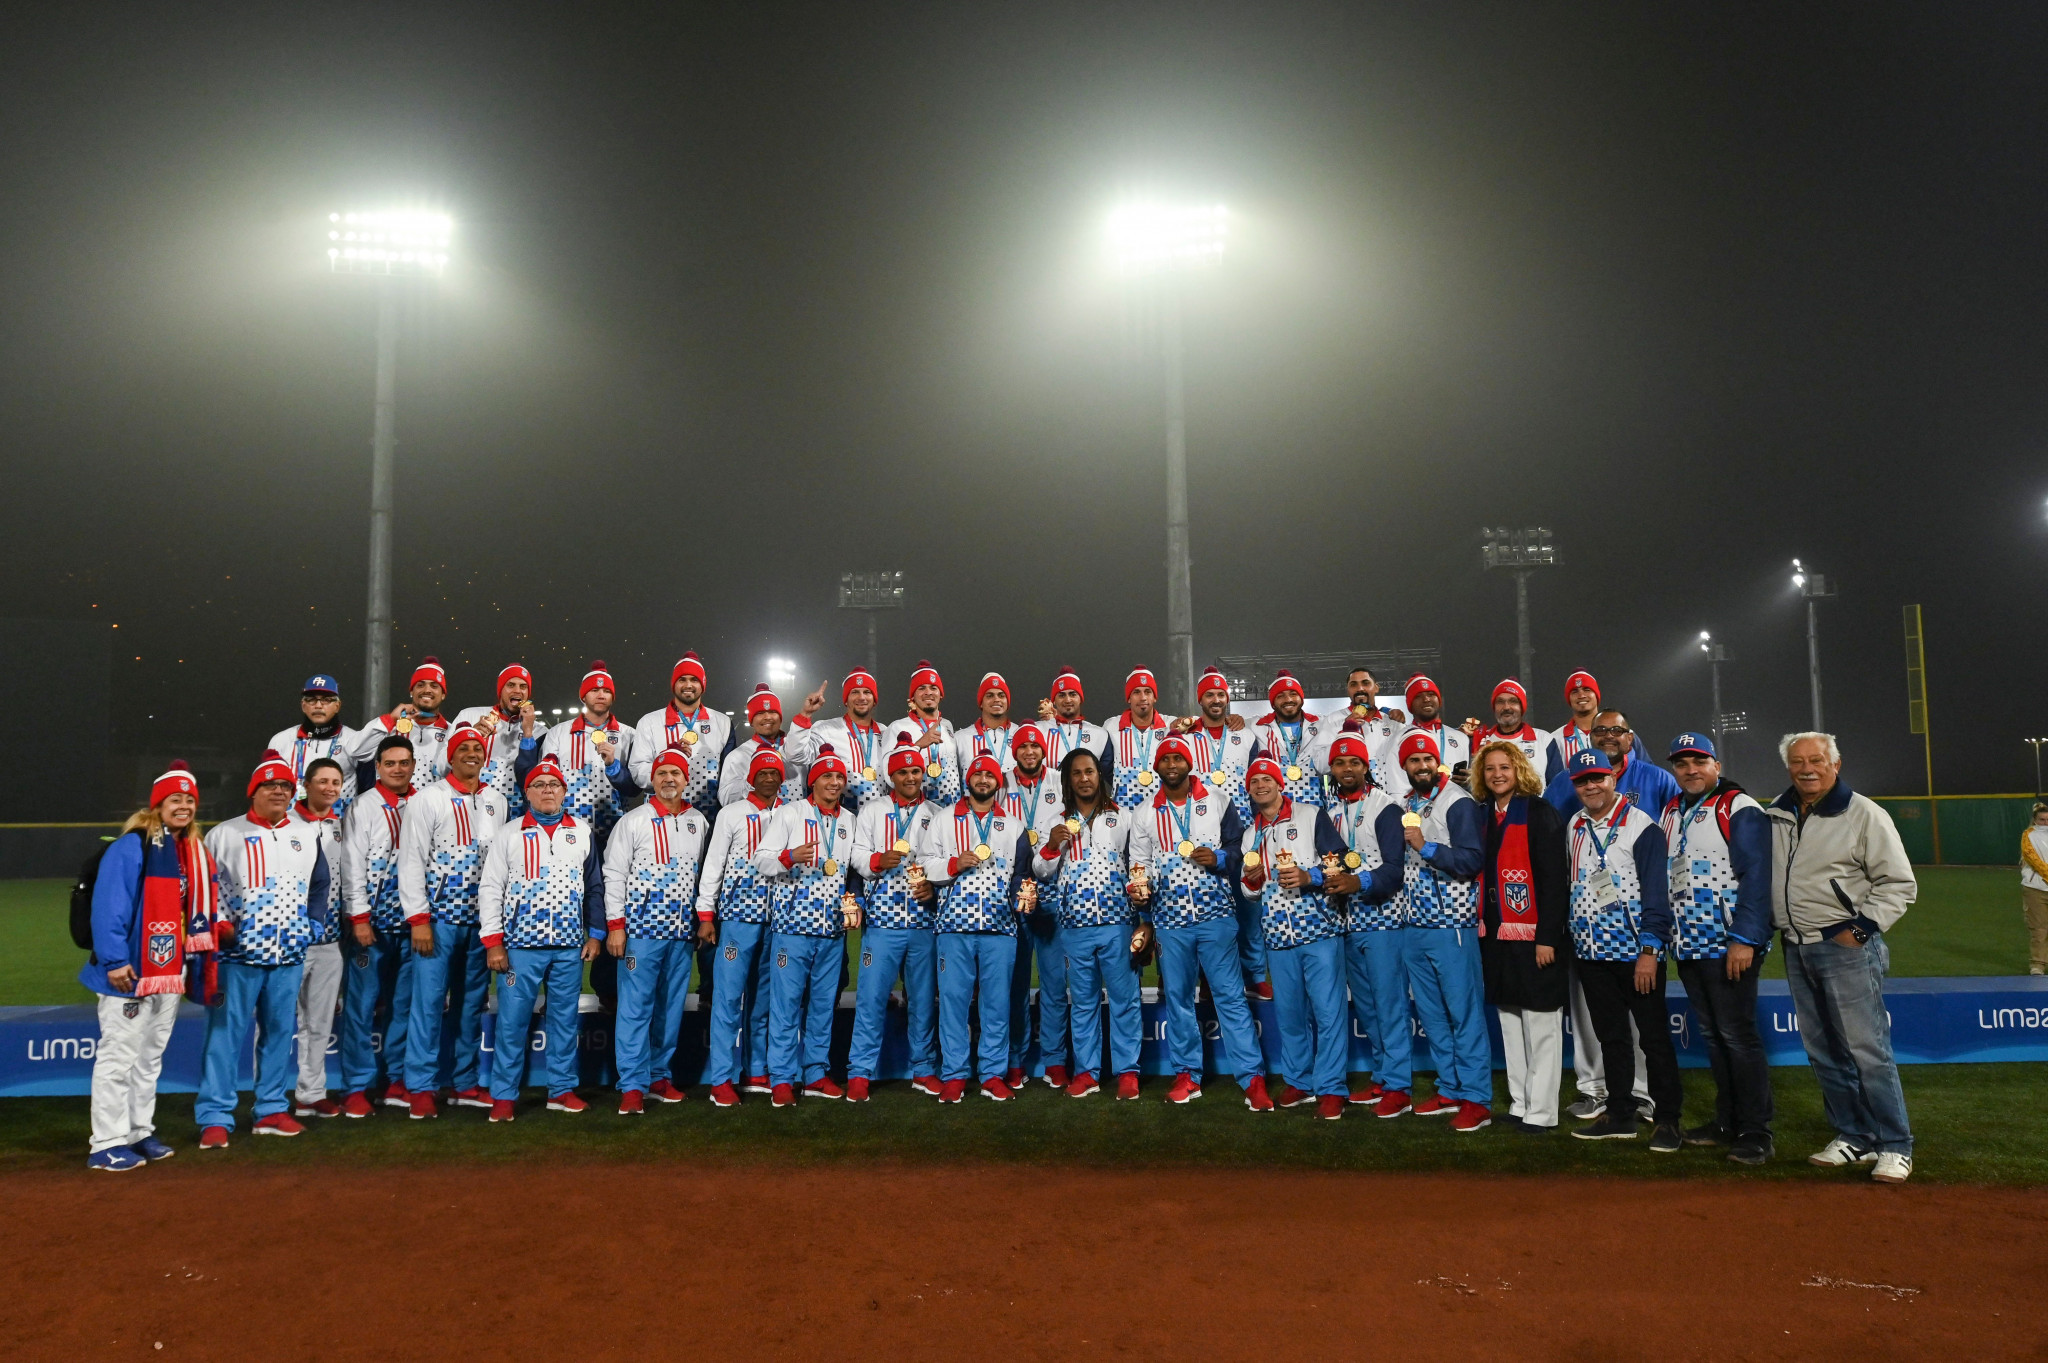 Puerto Rico won the baseball tournament at the Lima 2019 Pan American Games ©Getty Images